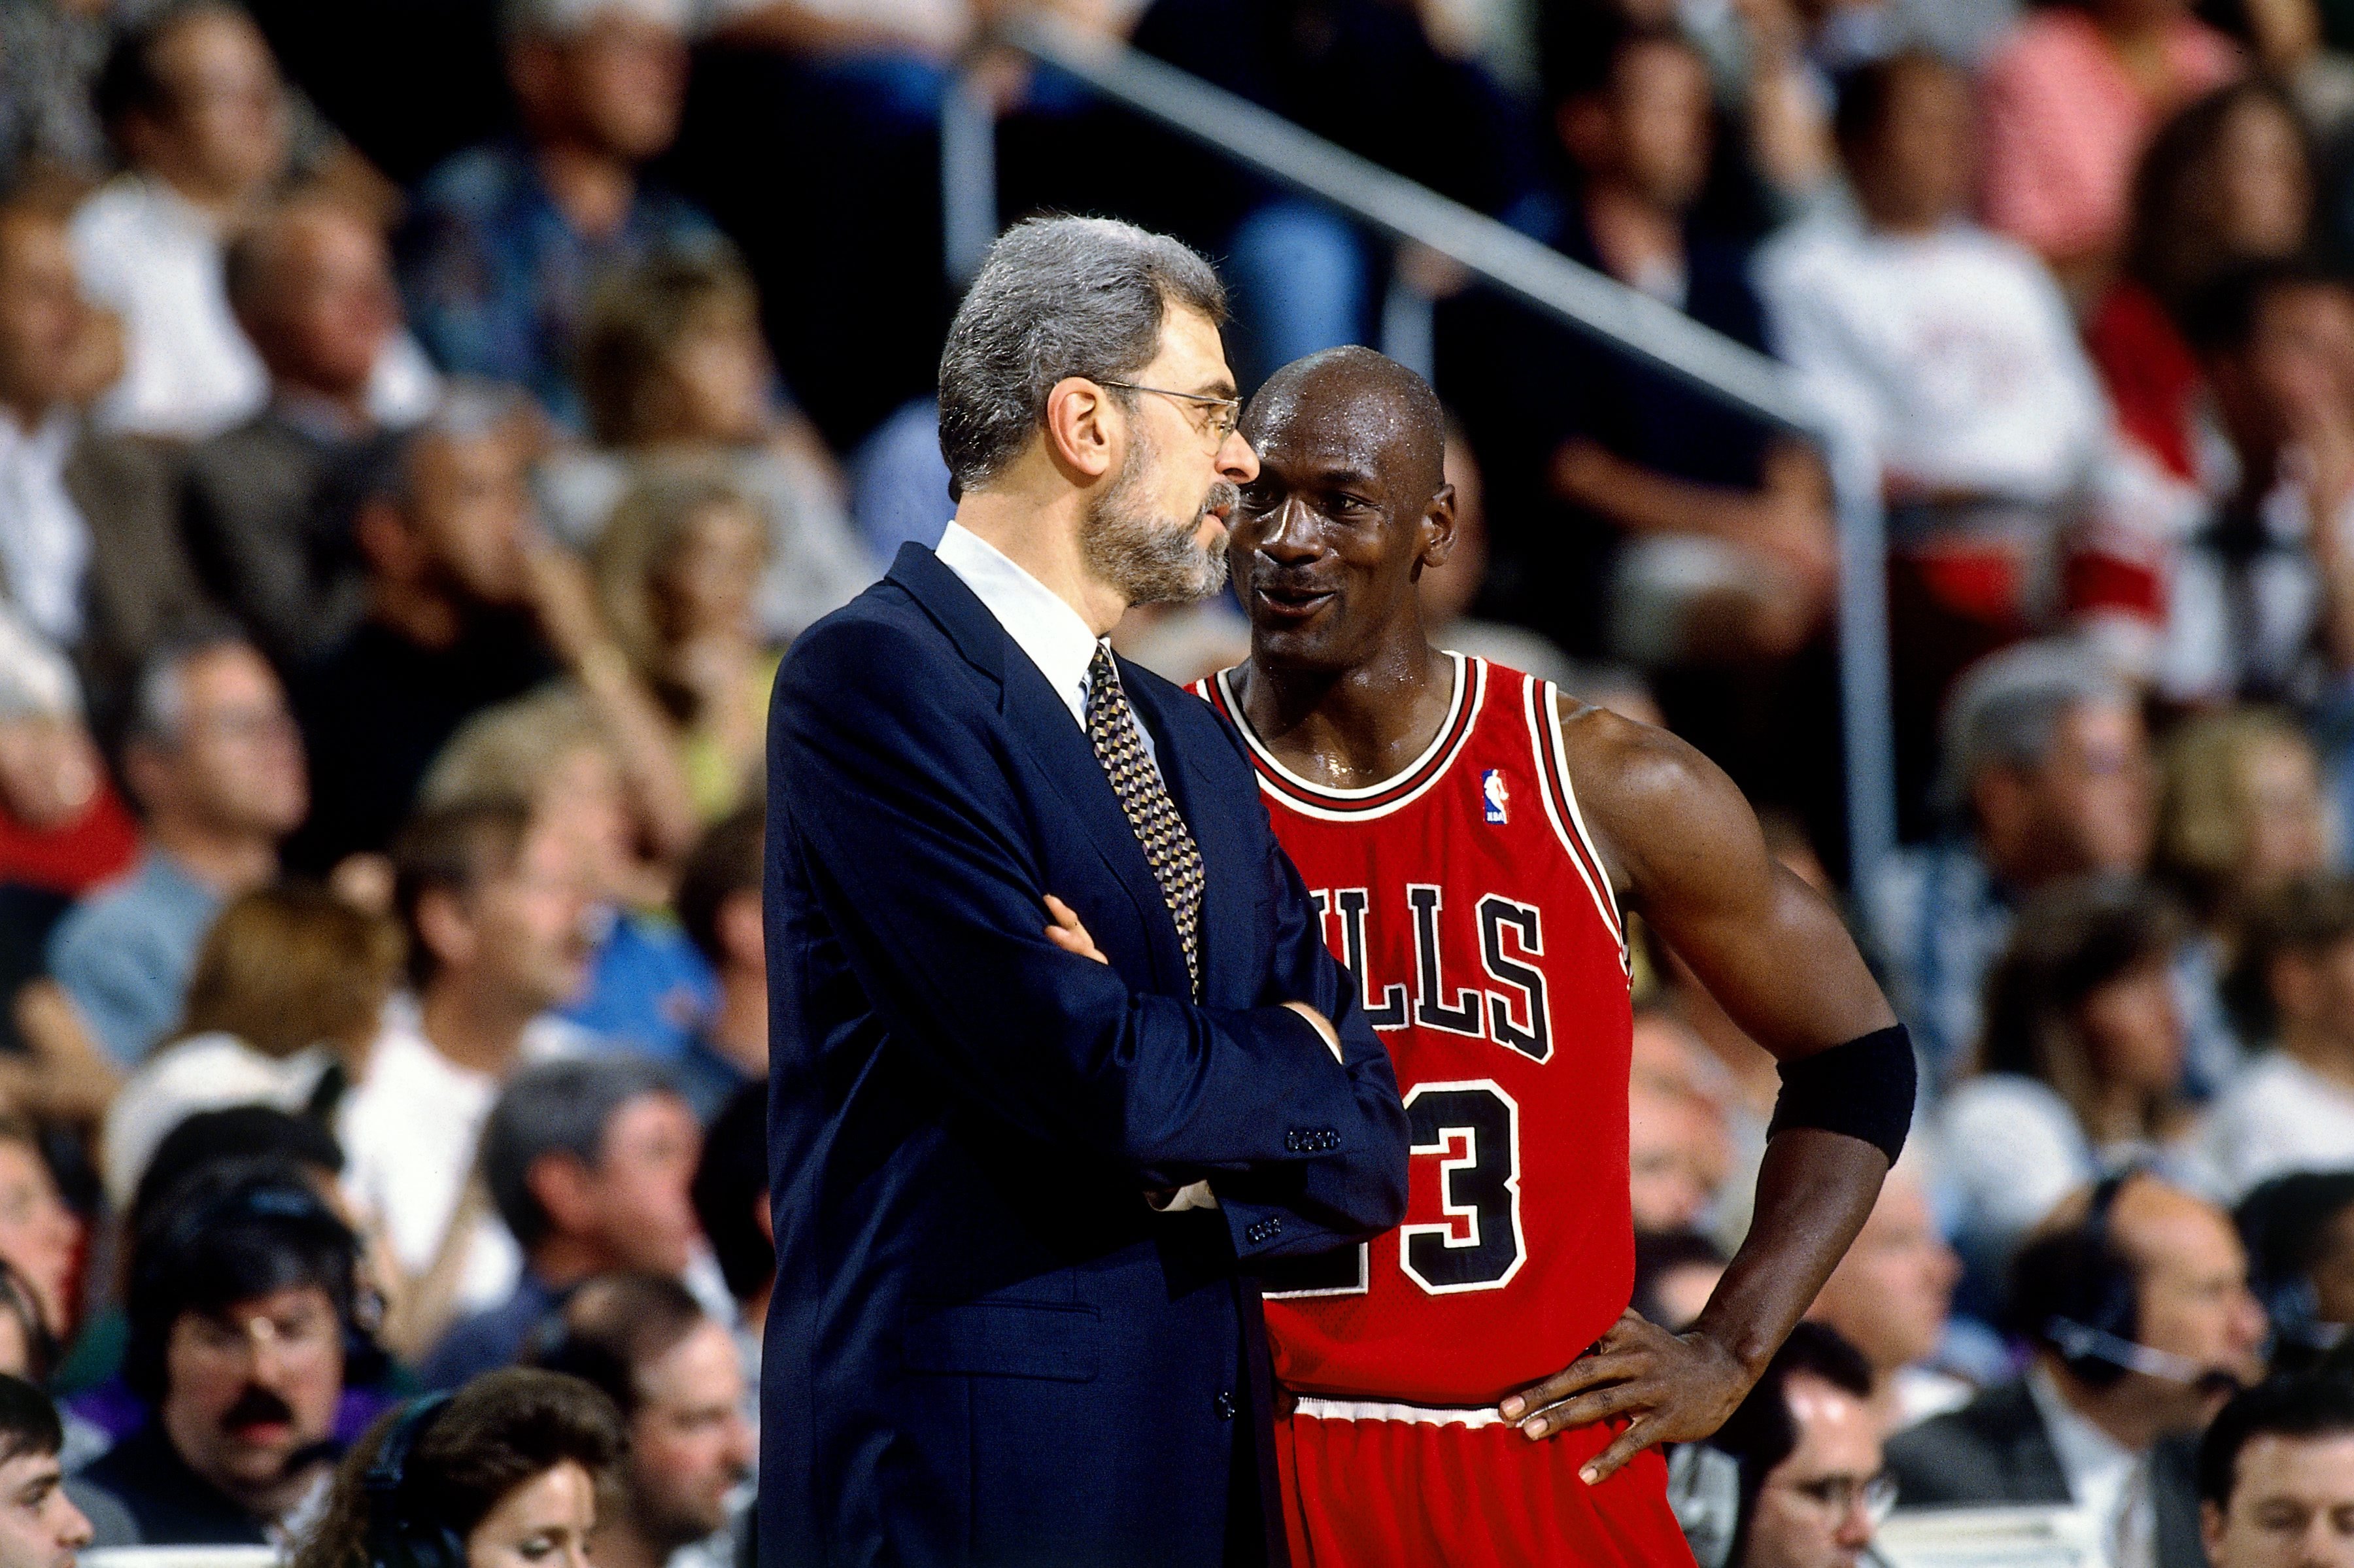 The master of Zen chats with the master of everything else NBA. (Photo by Andrew D. Bernstein/NBAE via Getty Images)